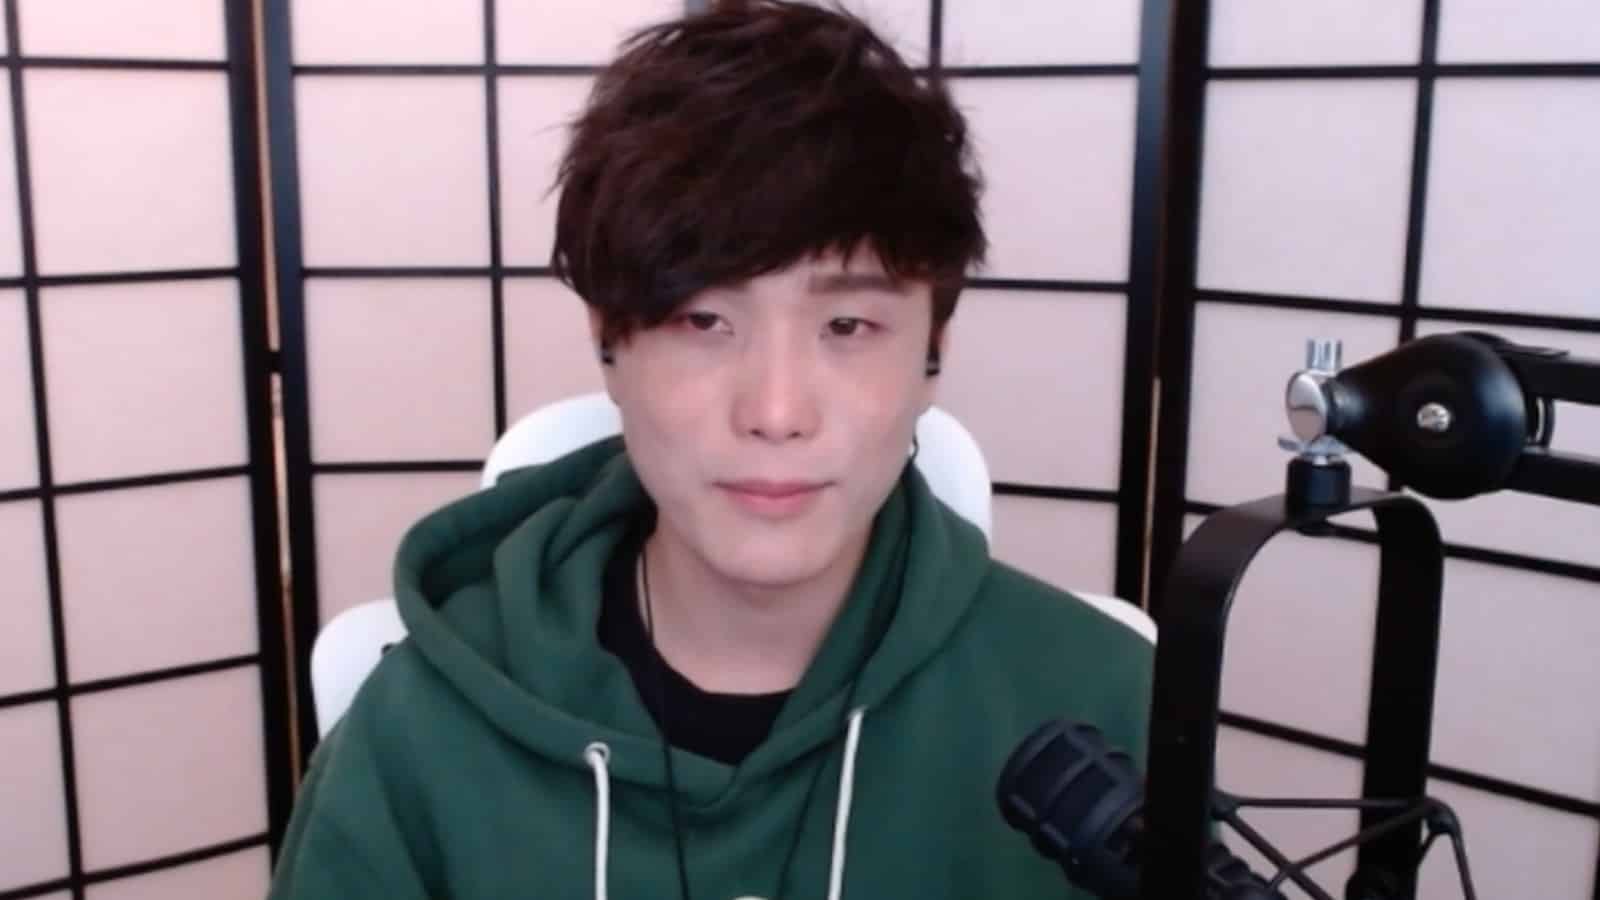 Sykkuno getting emotional while streaming